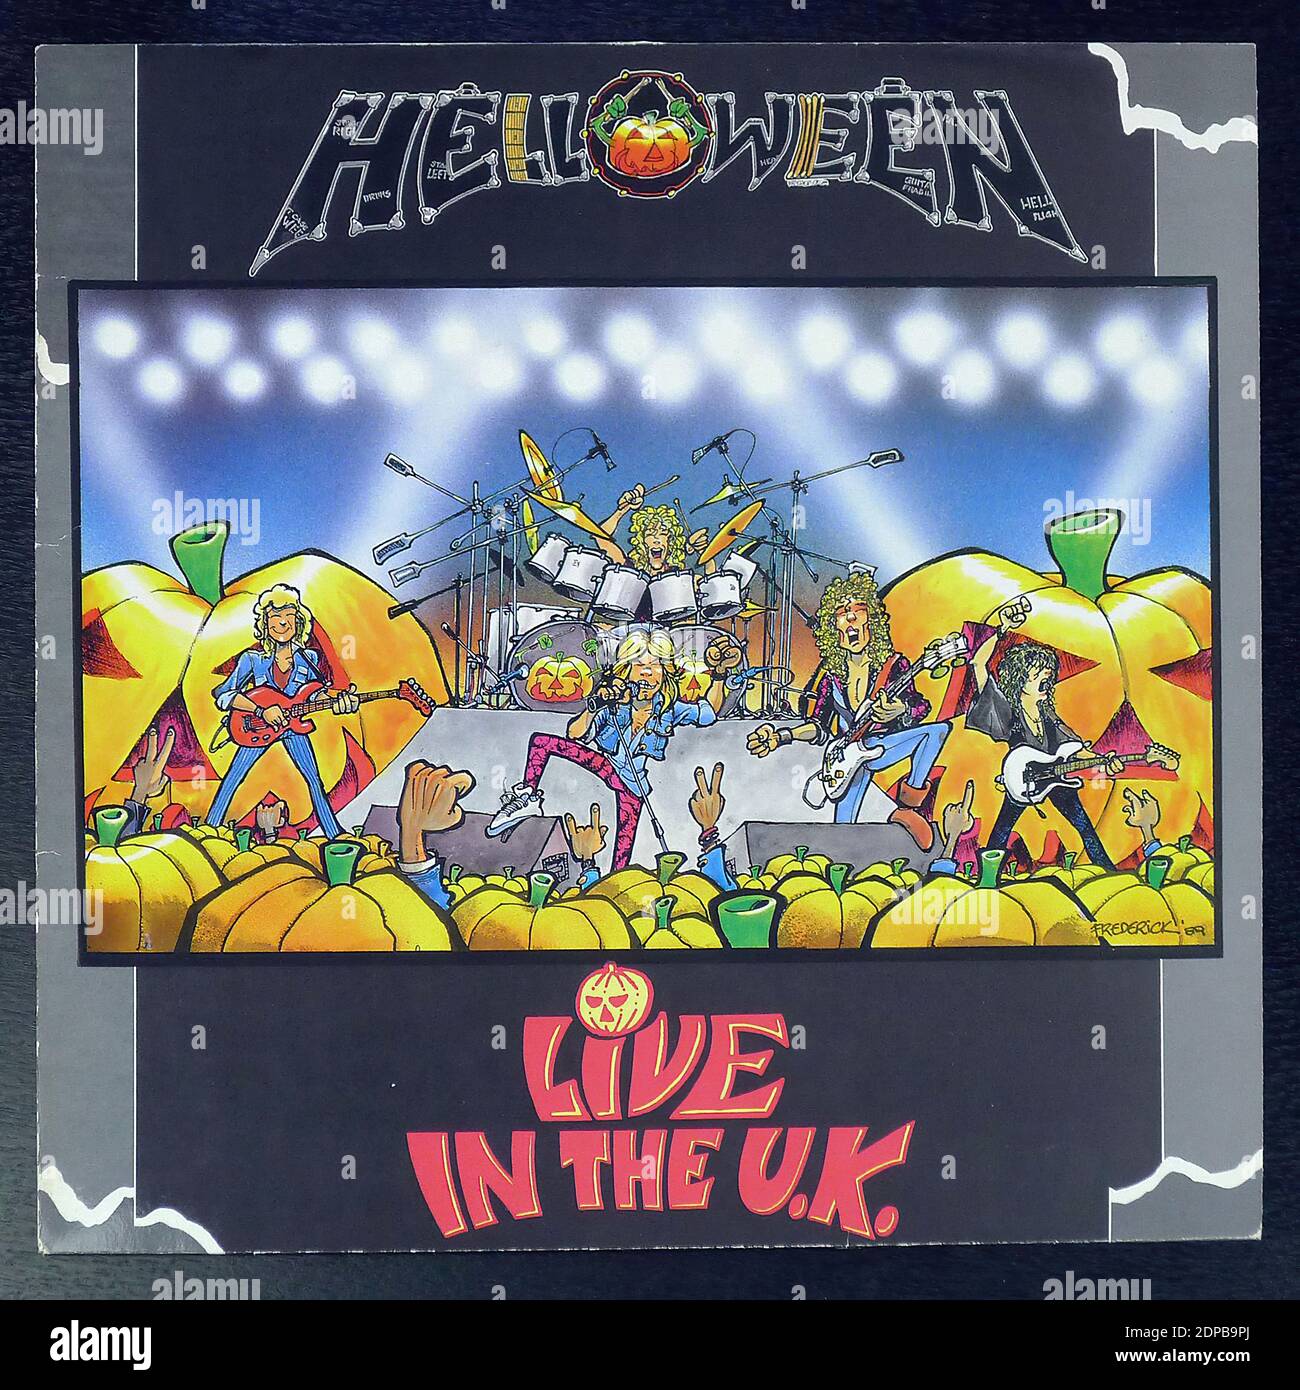 Helloween Live in the UK - Vintage Vinyl Record Cover02 Stock Photo - Alamy